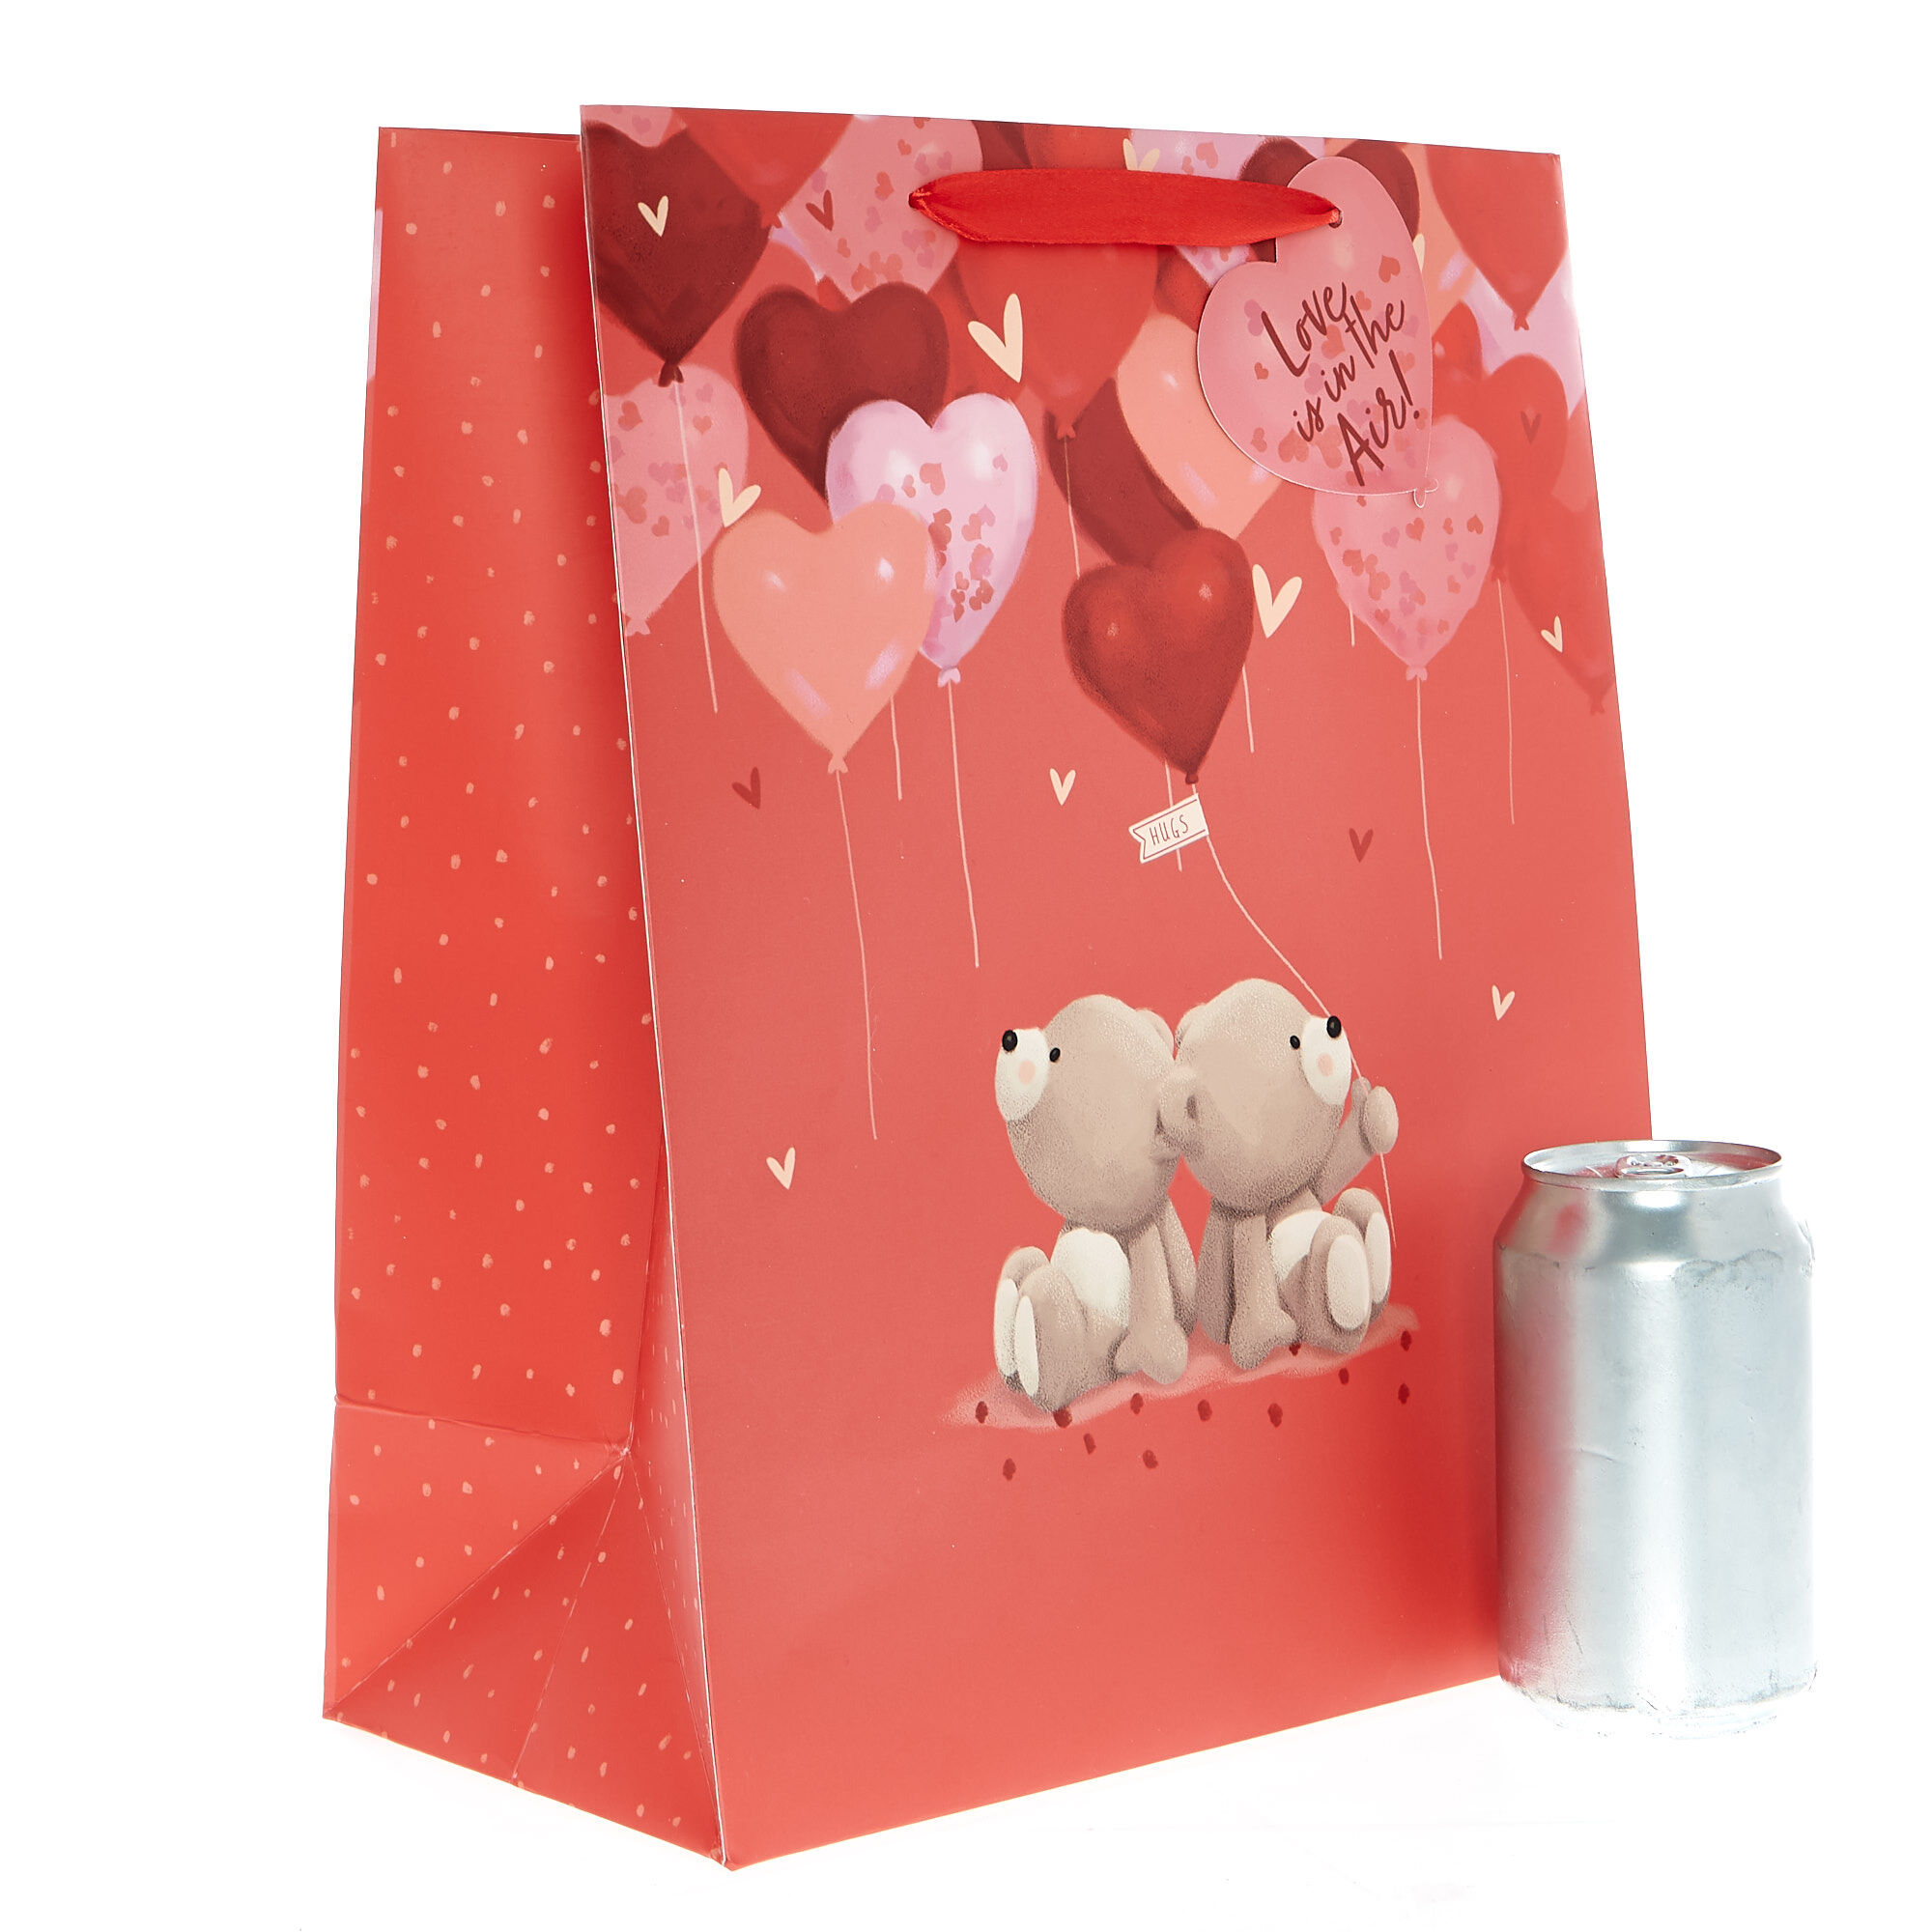 Valentines day boxsets and gift ideas | Miss Cupcakes